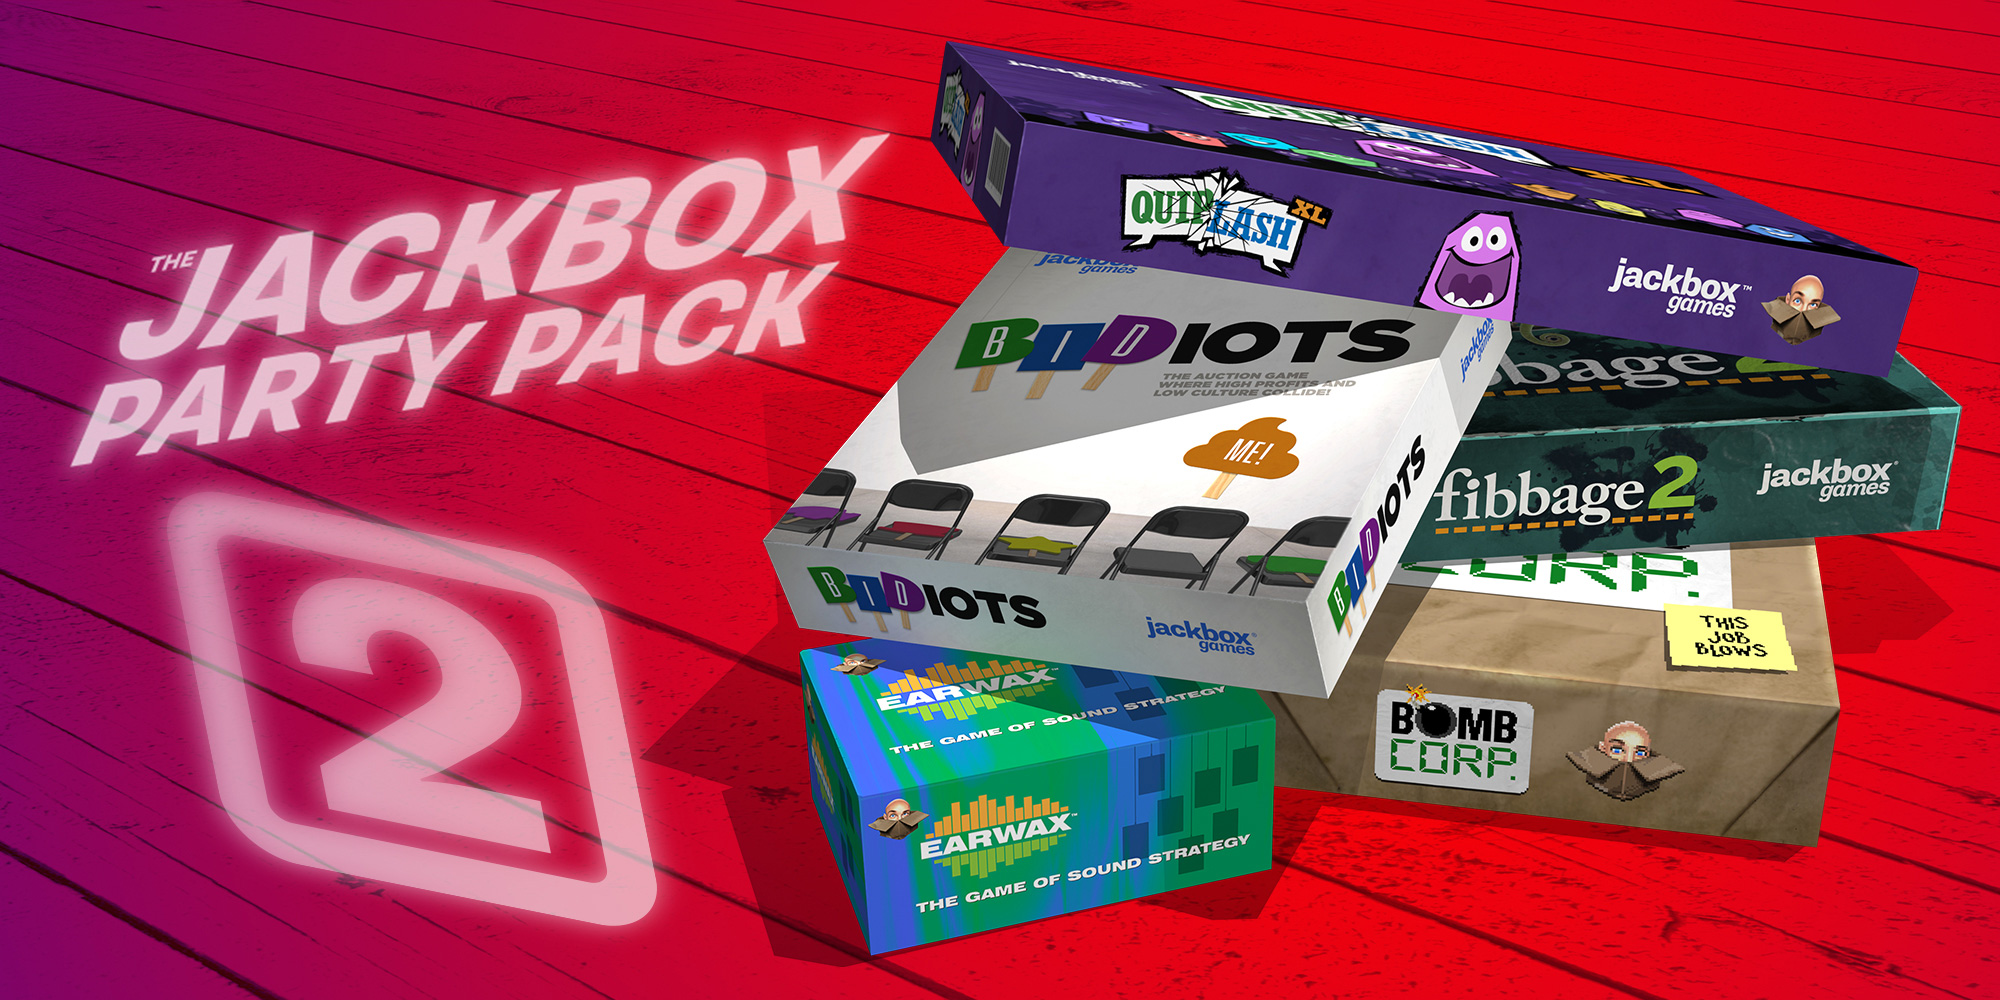 what is the jackbox party pack 4